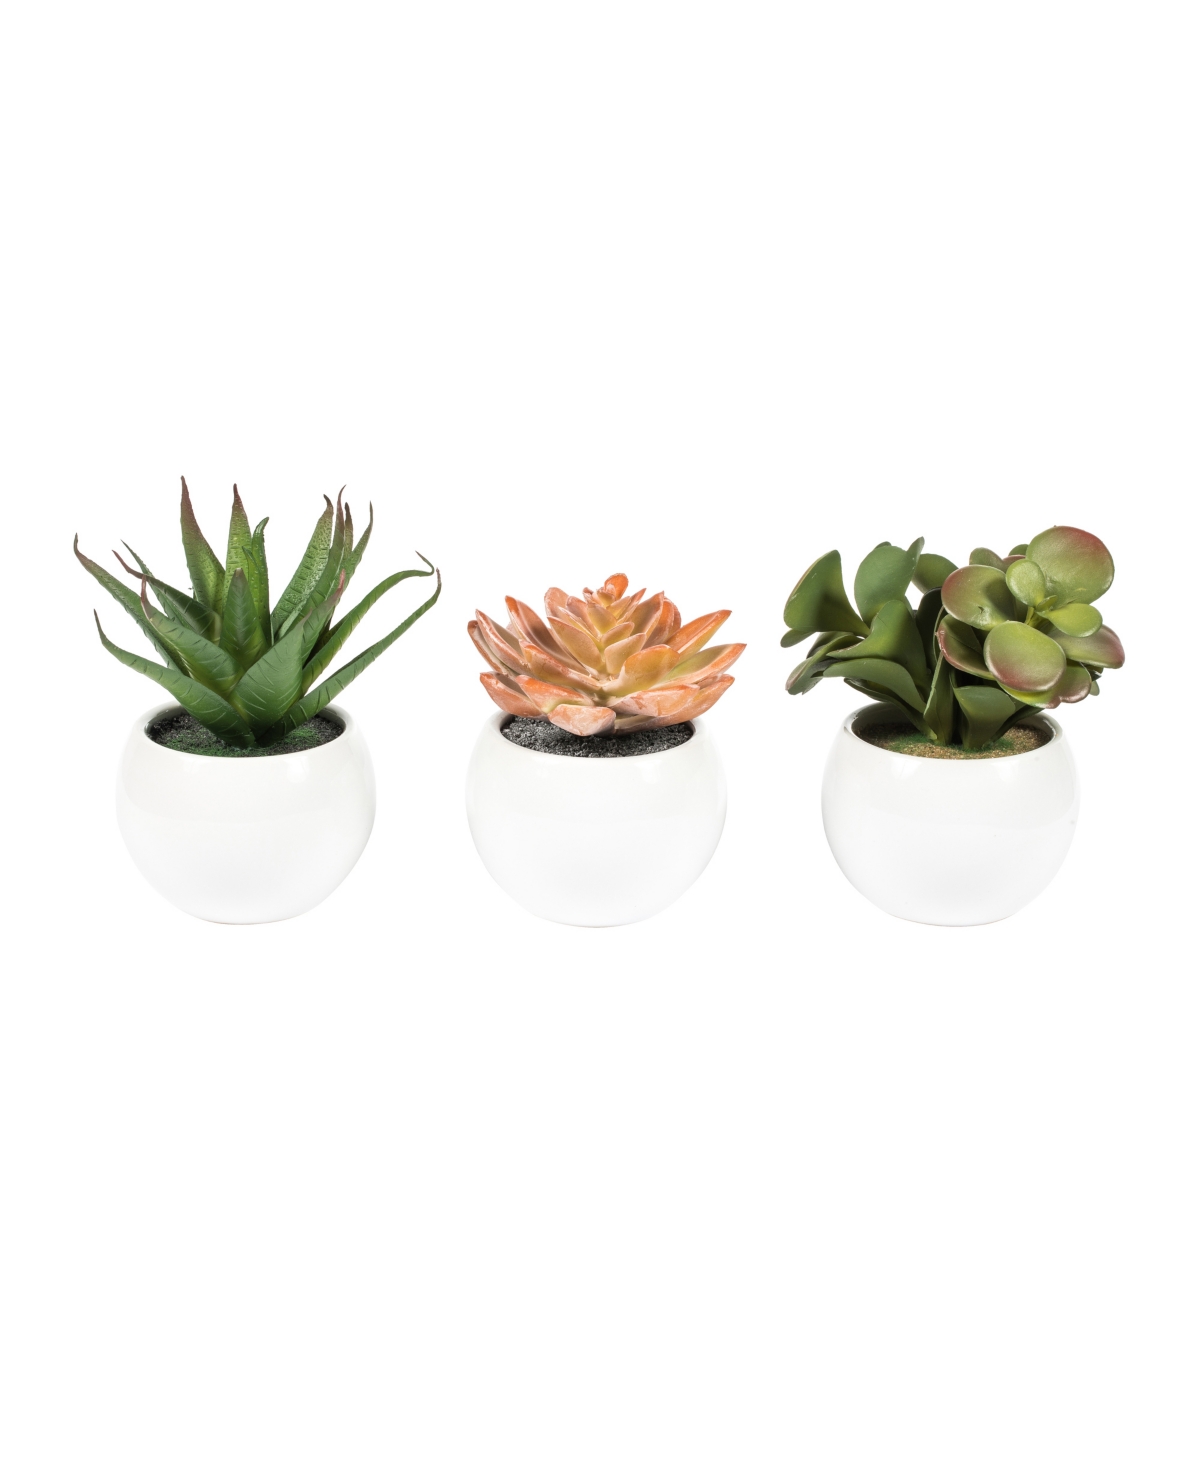 5" Artificial Assorted Potted Succulents. - Multi